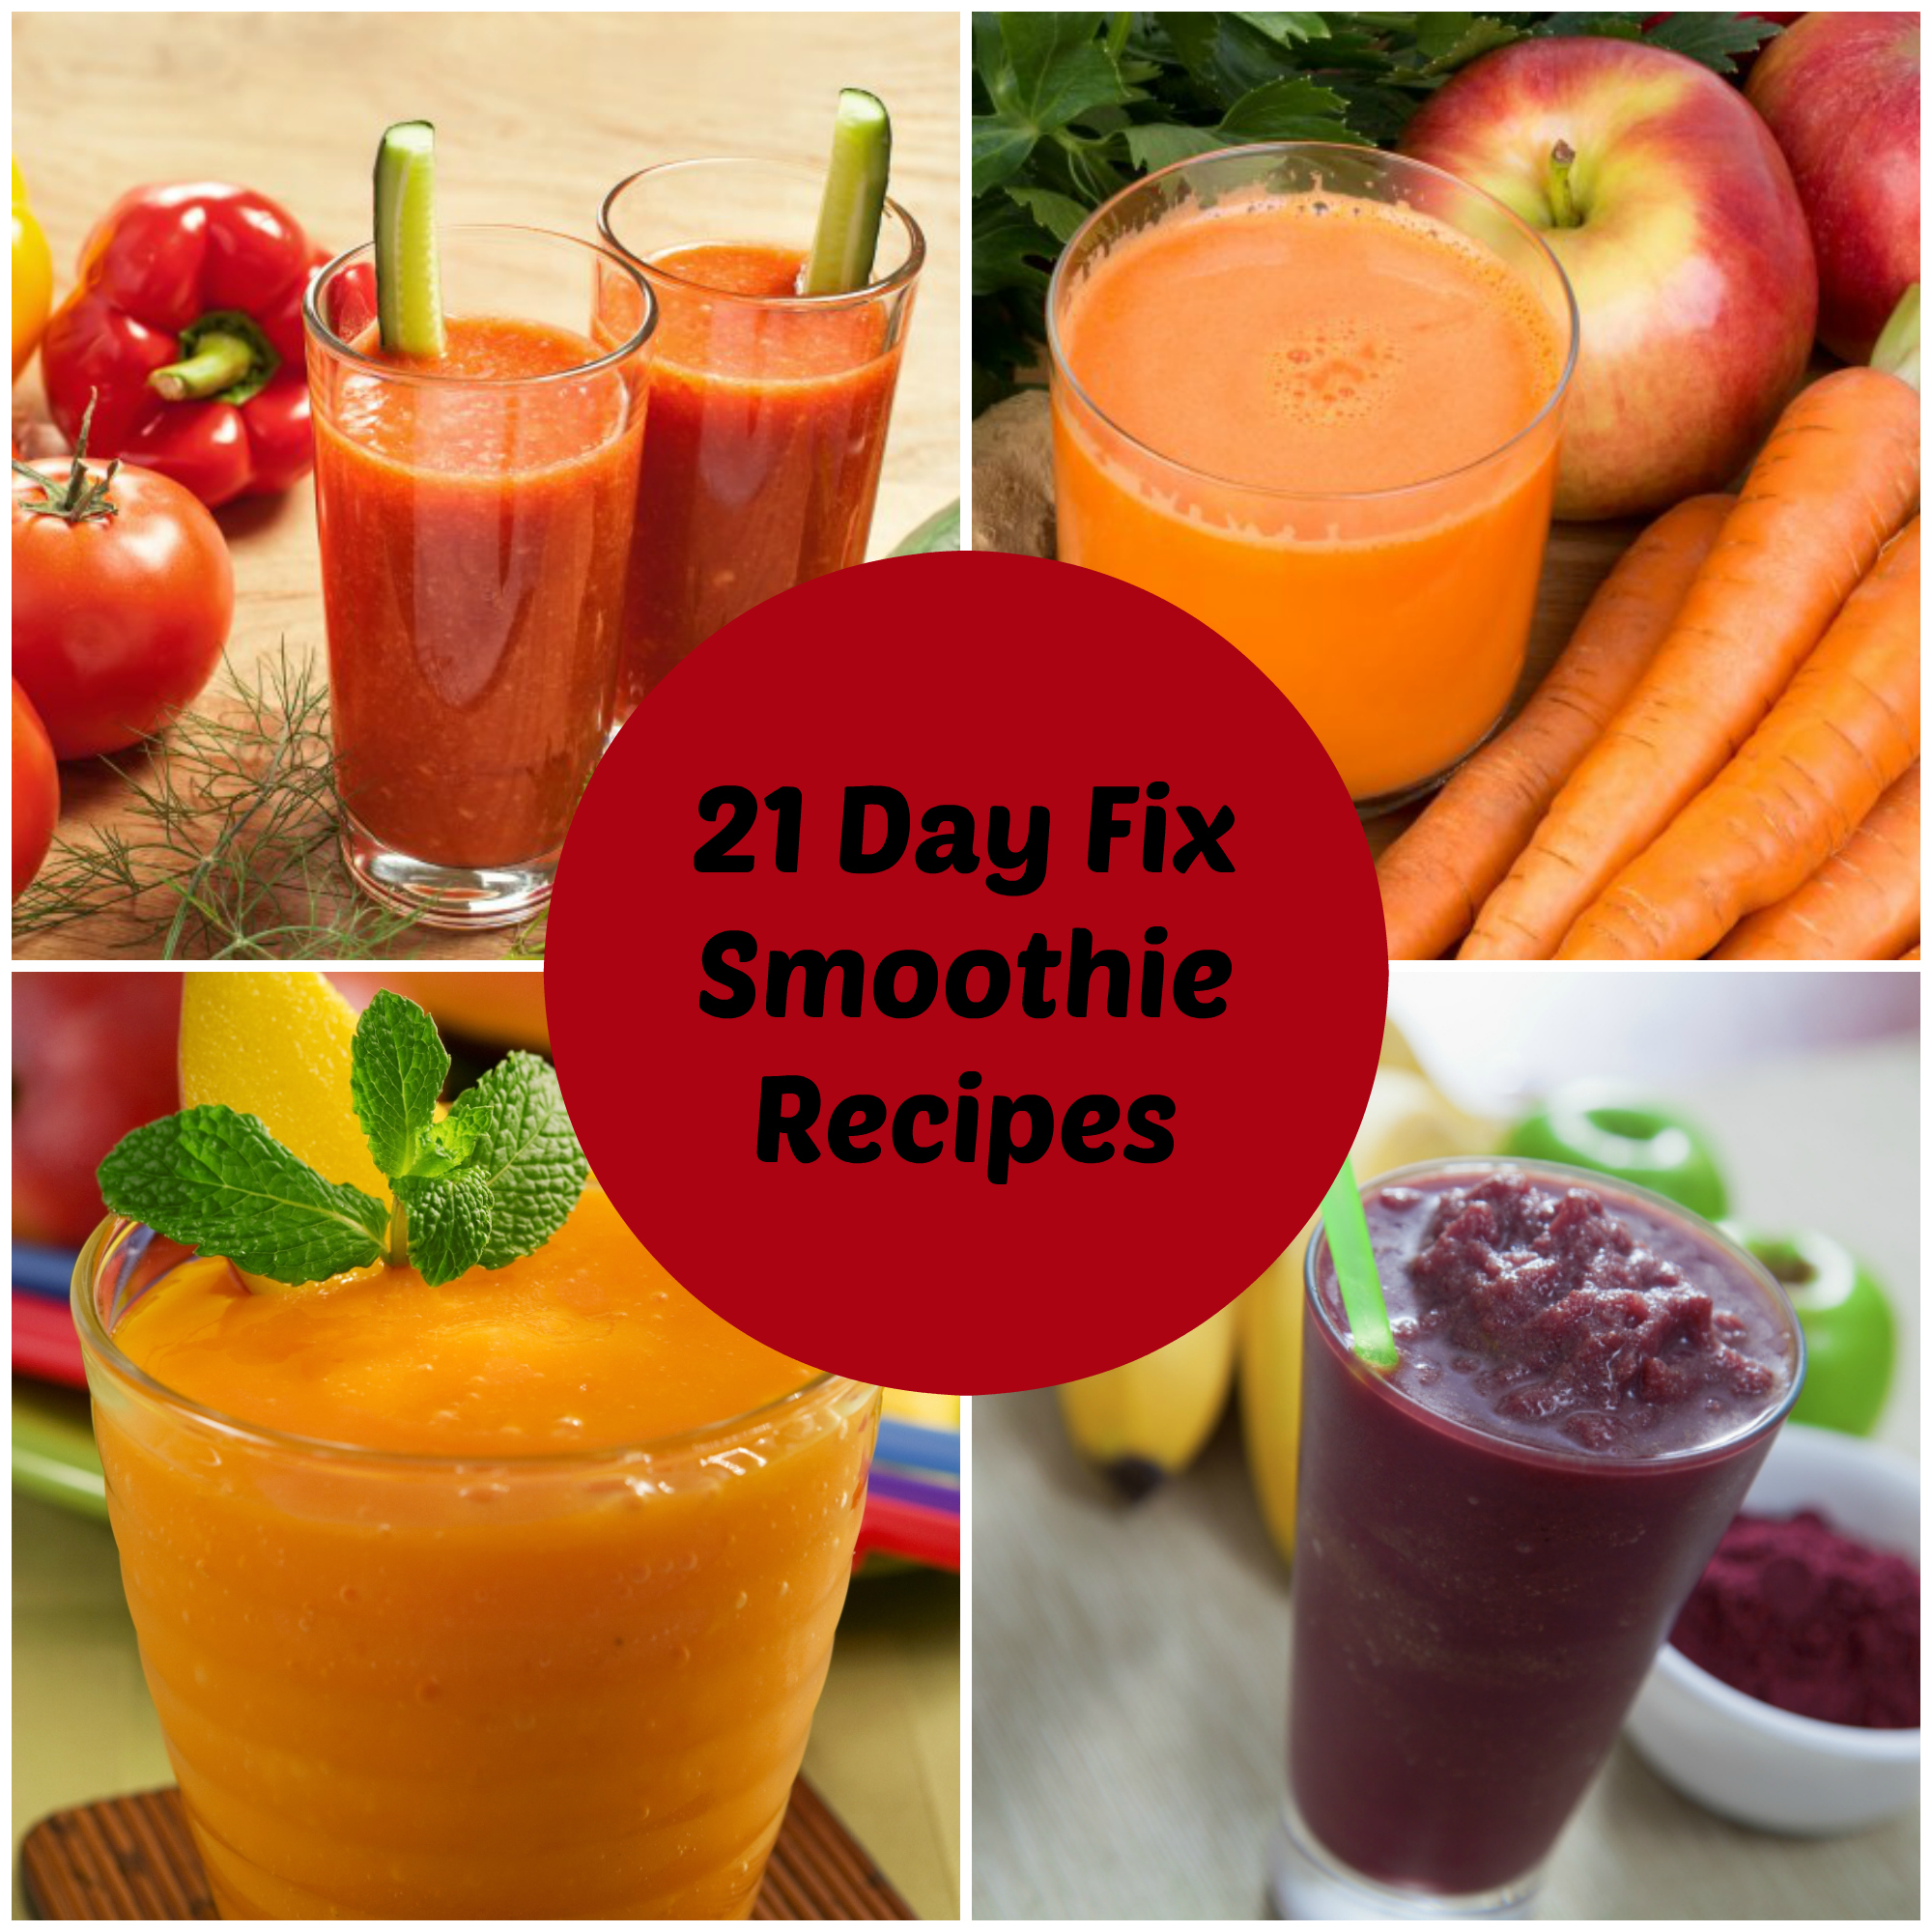 How to Make Smoothies for the 21 Day Fix